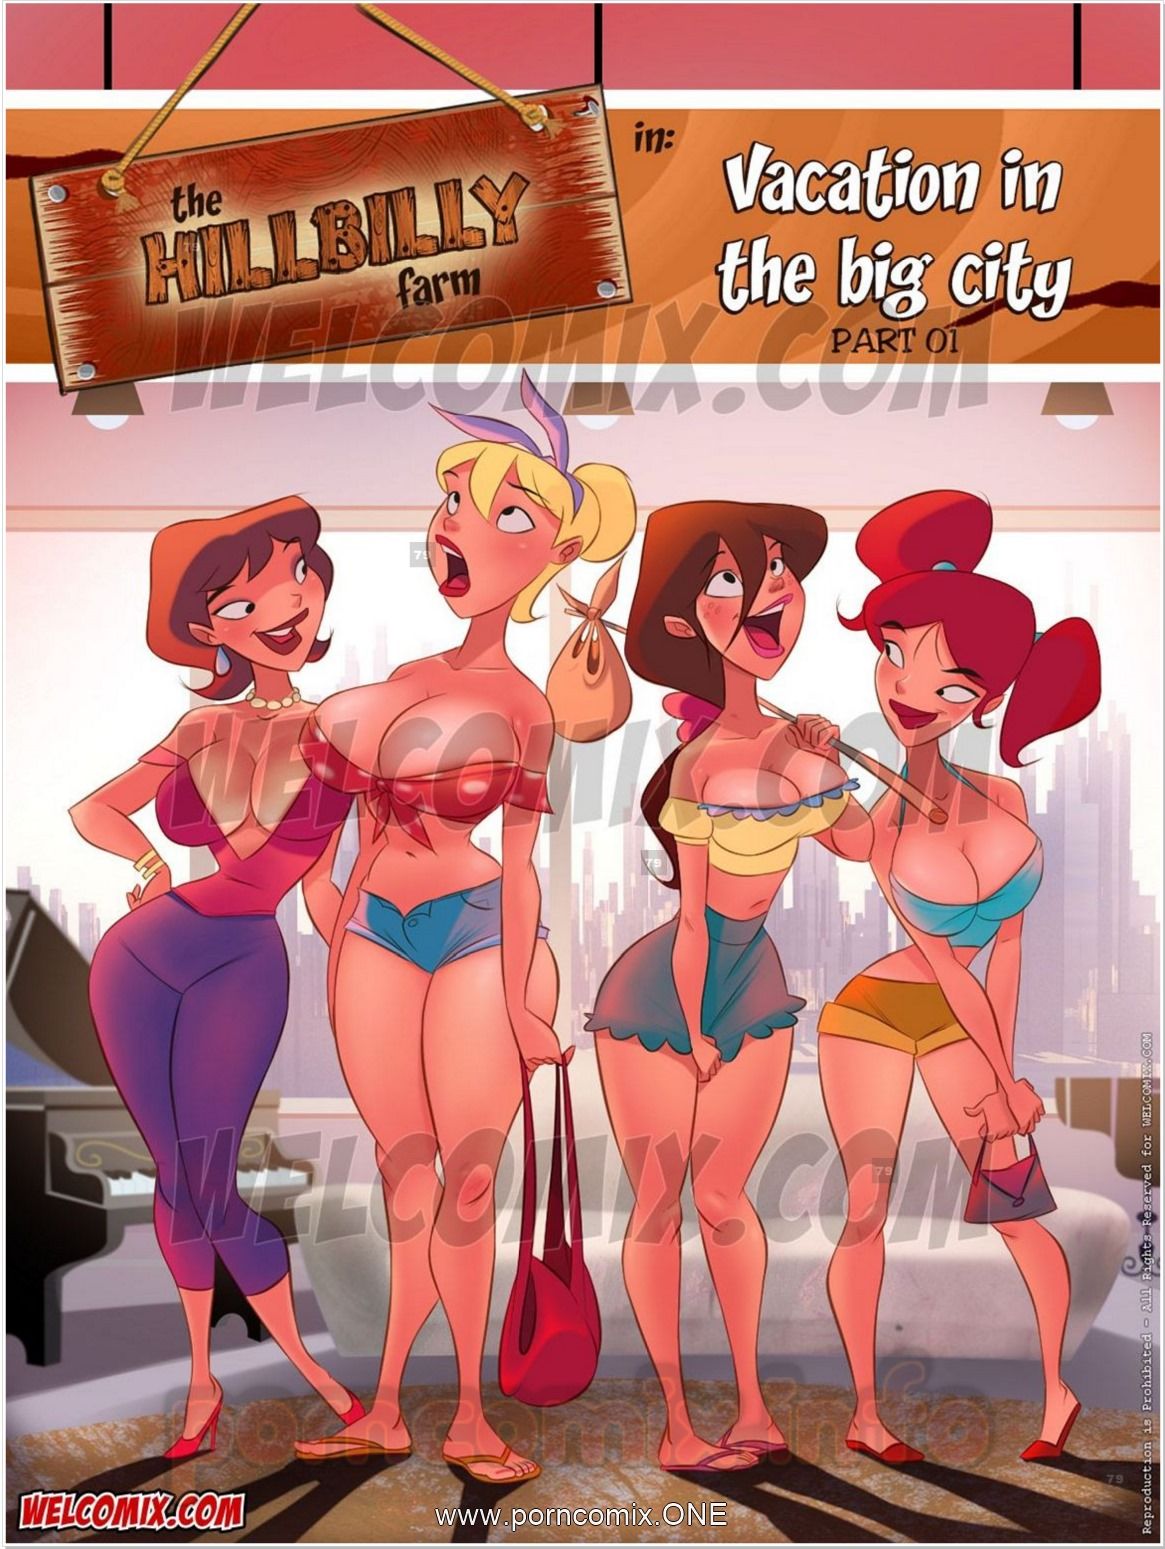 Welcomix - Hillbilly Gang 15 - Vacation In Big City page 1